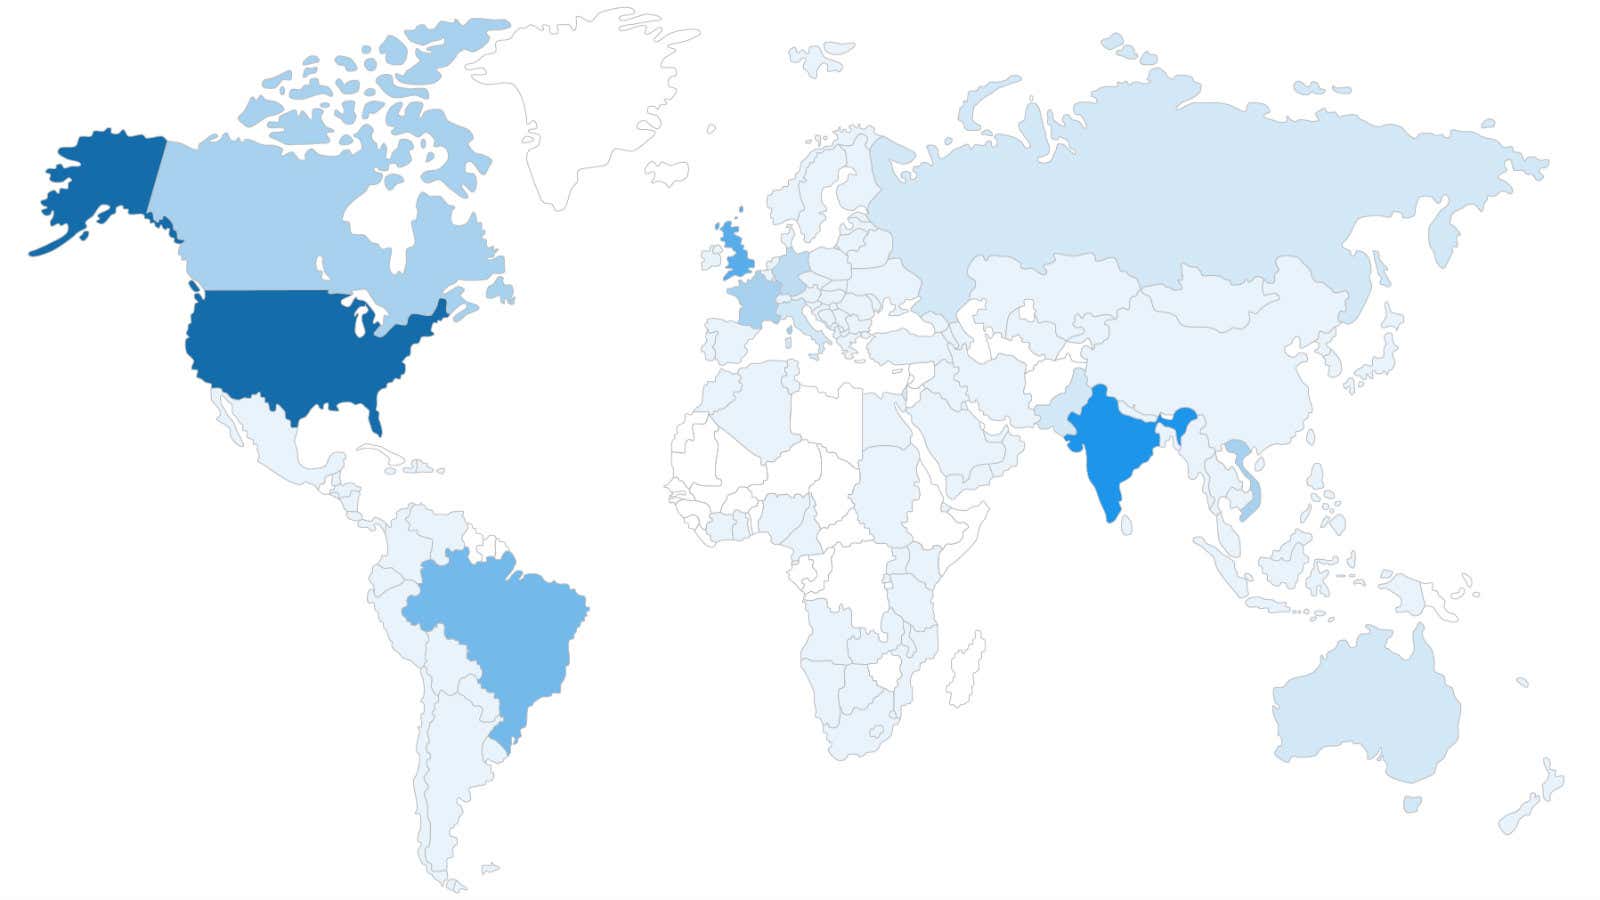 World map shared by Facebook in a newsletter.